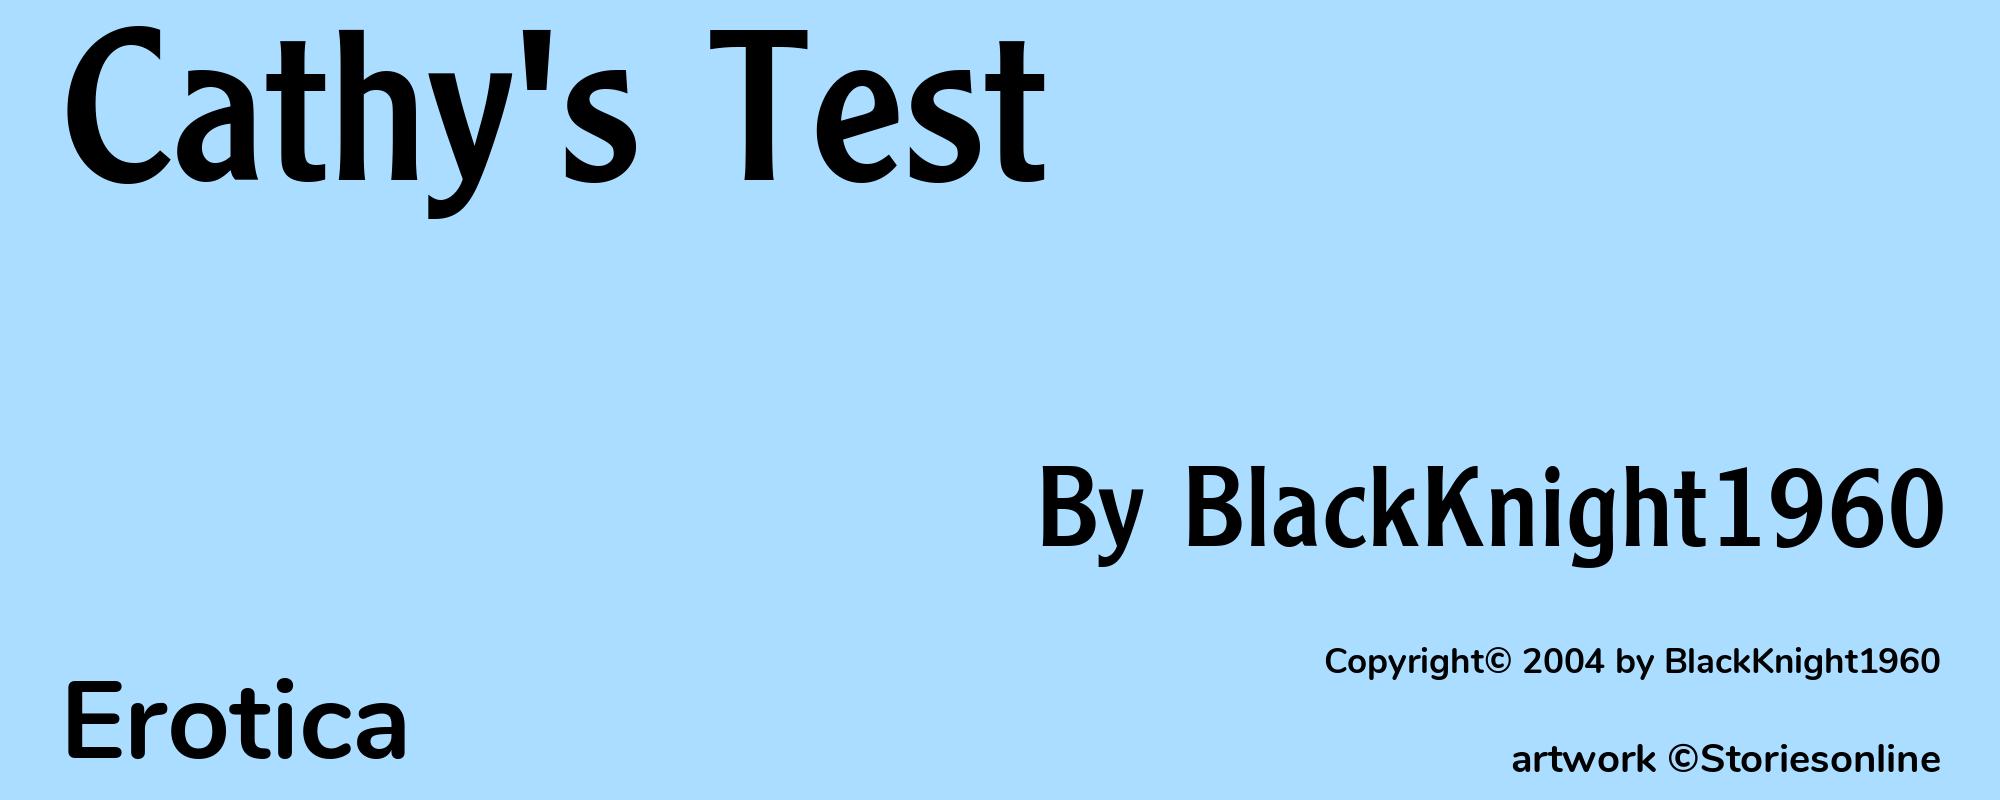 Cathy's Test - Cover